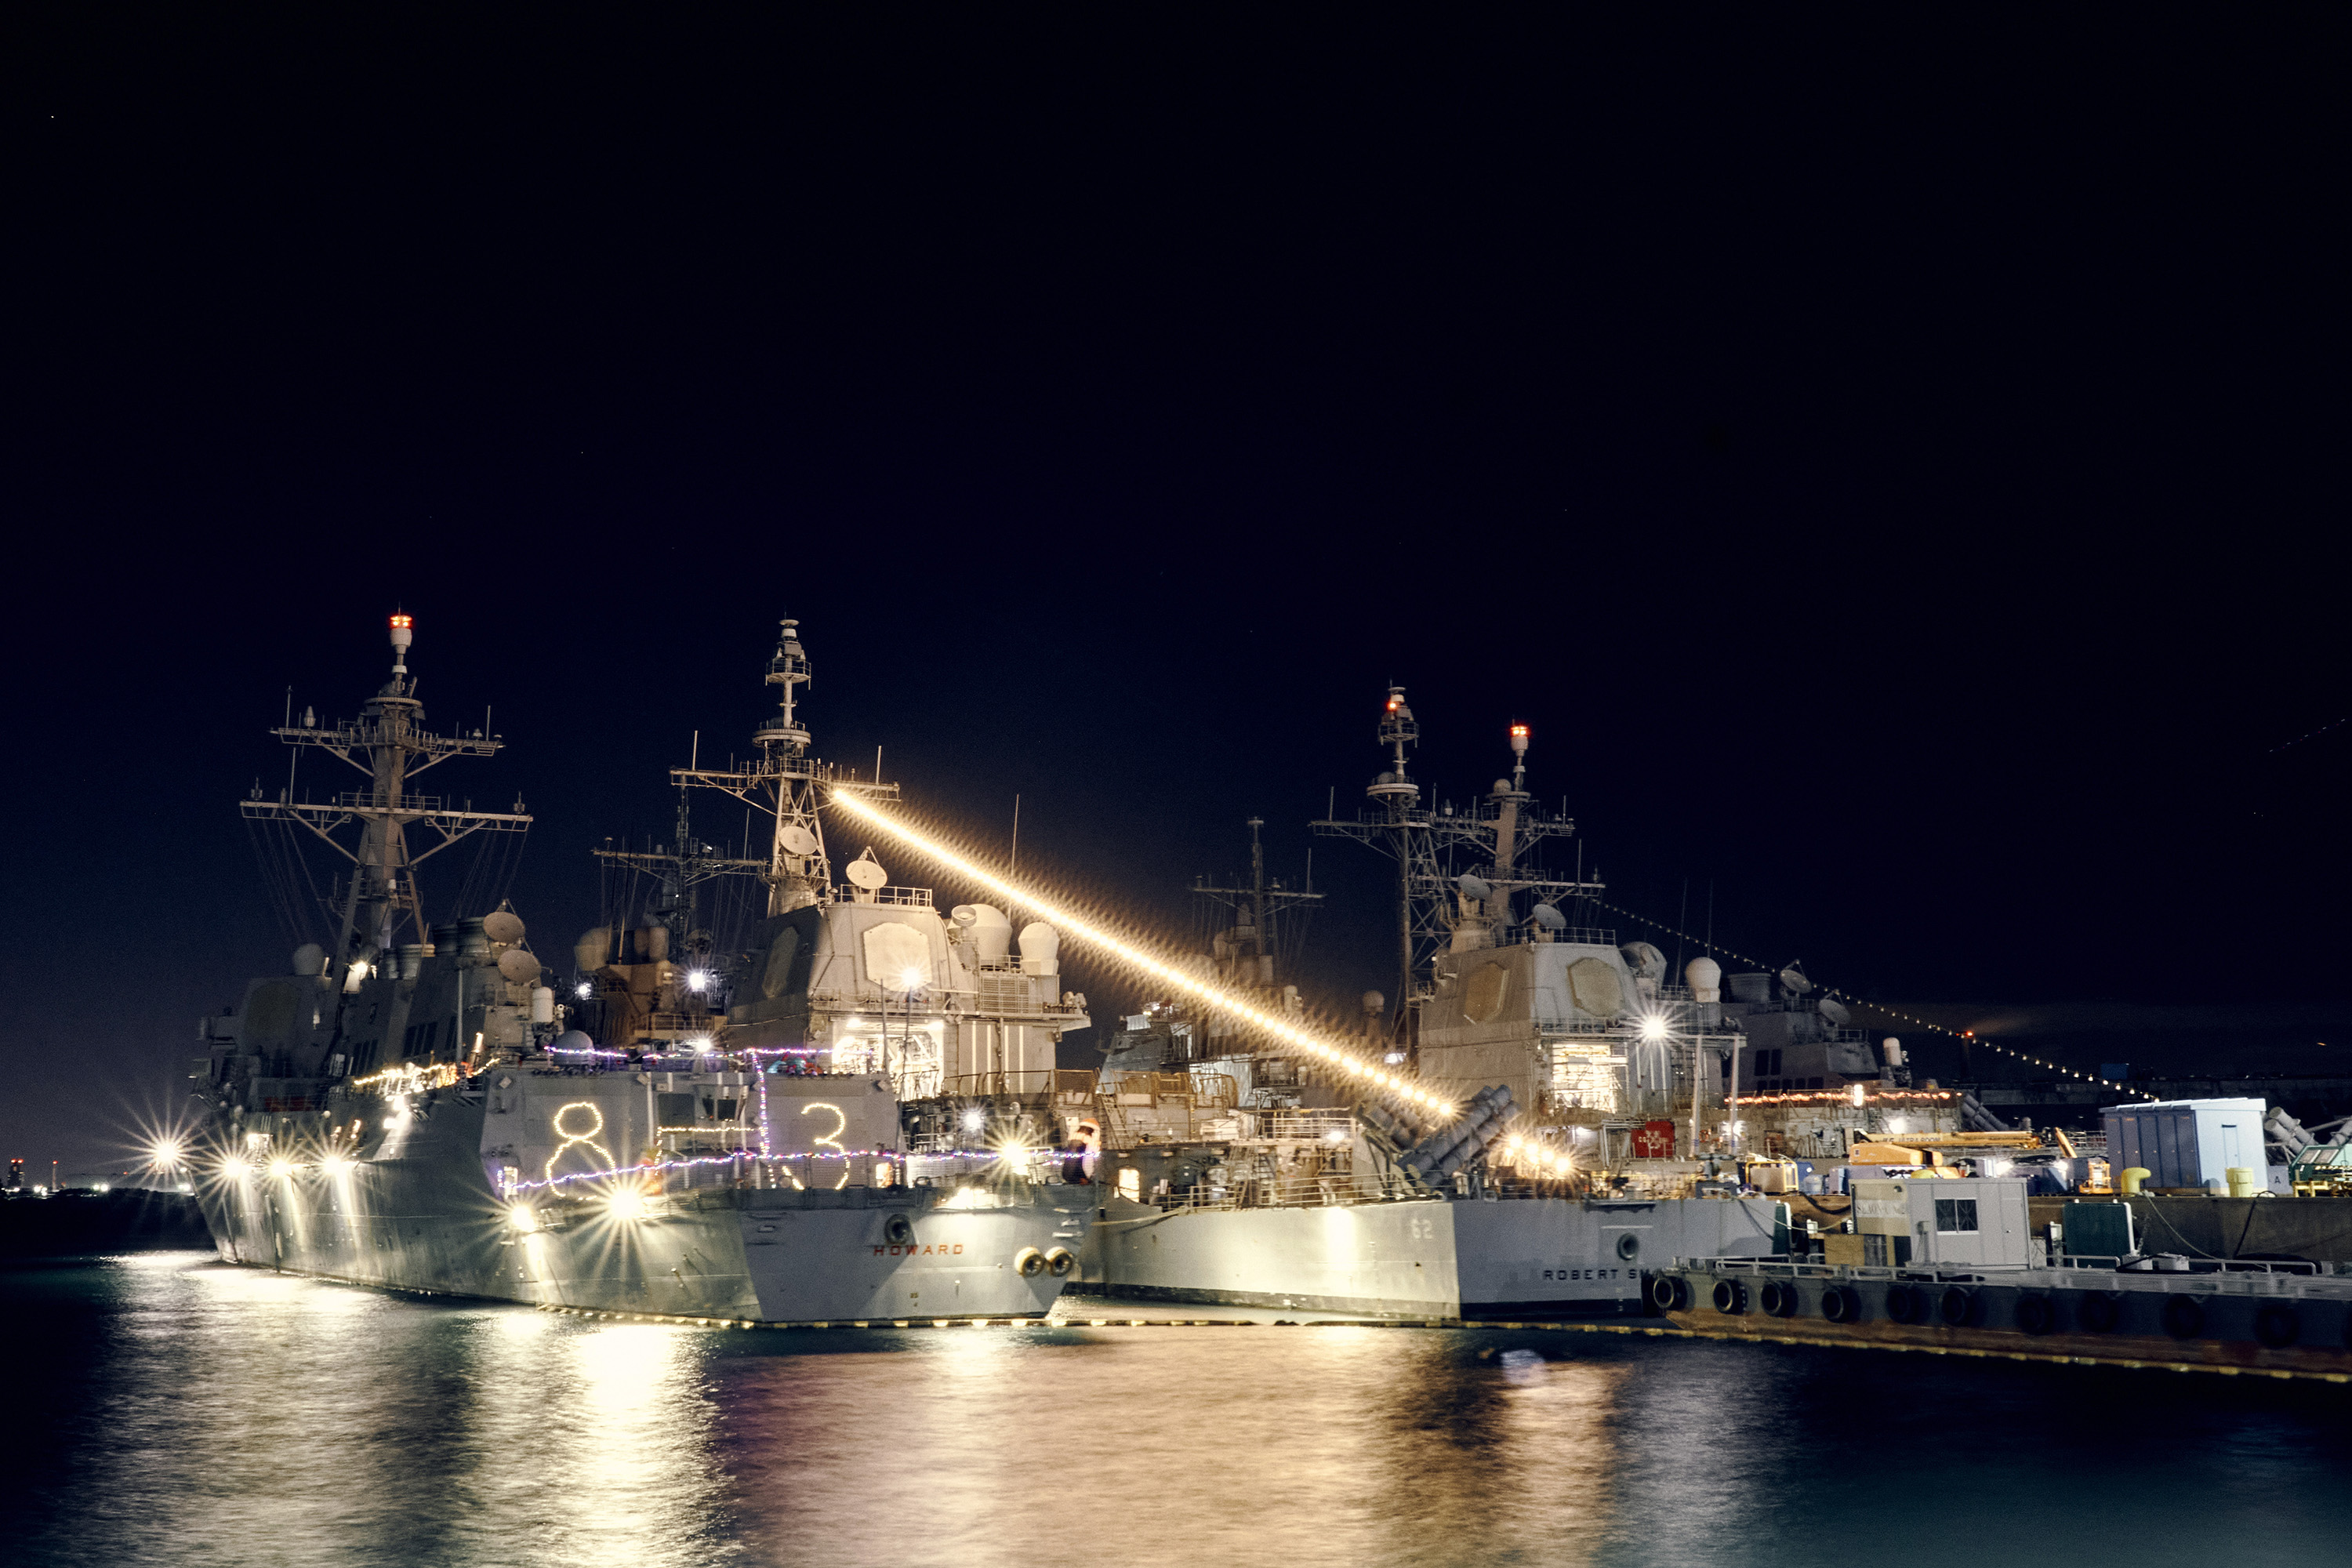 Moored ships are decorated with holiday lights, which shine against a dark sky.